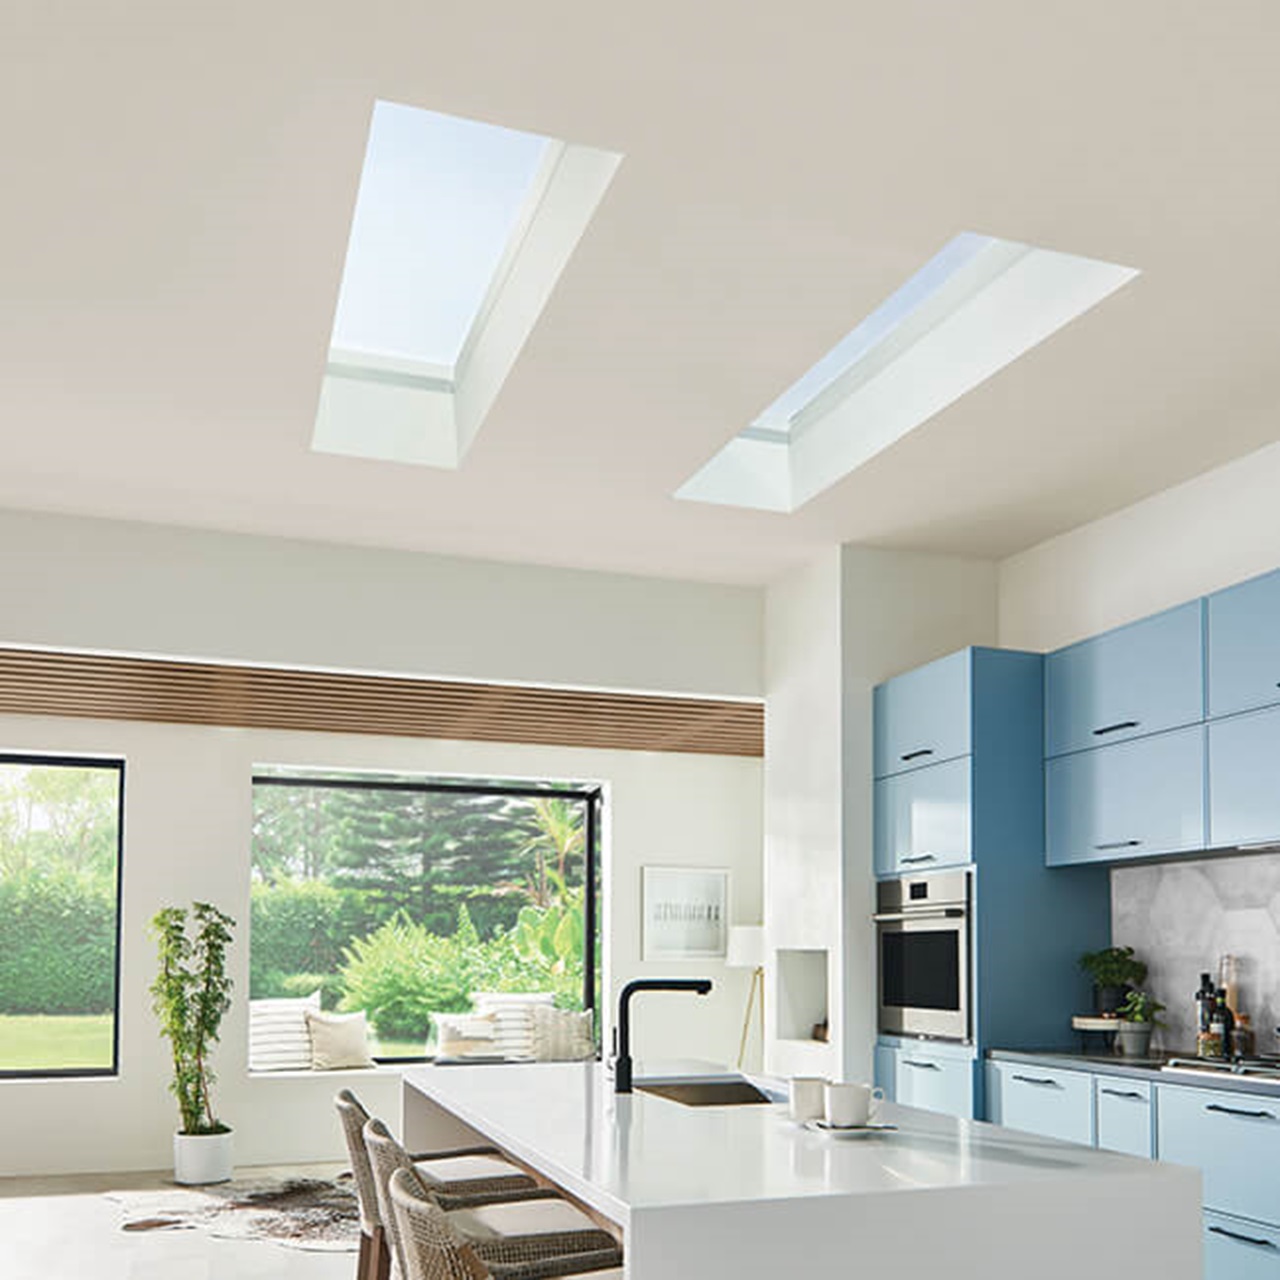 Interior of home with Marvin Skycove window box and Marvin Awaken Skylights